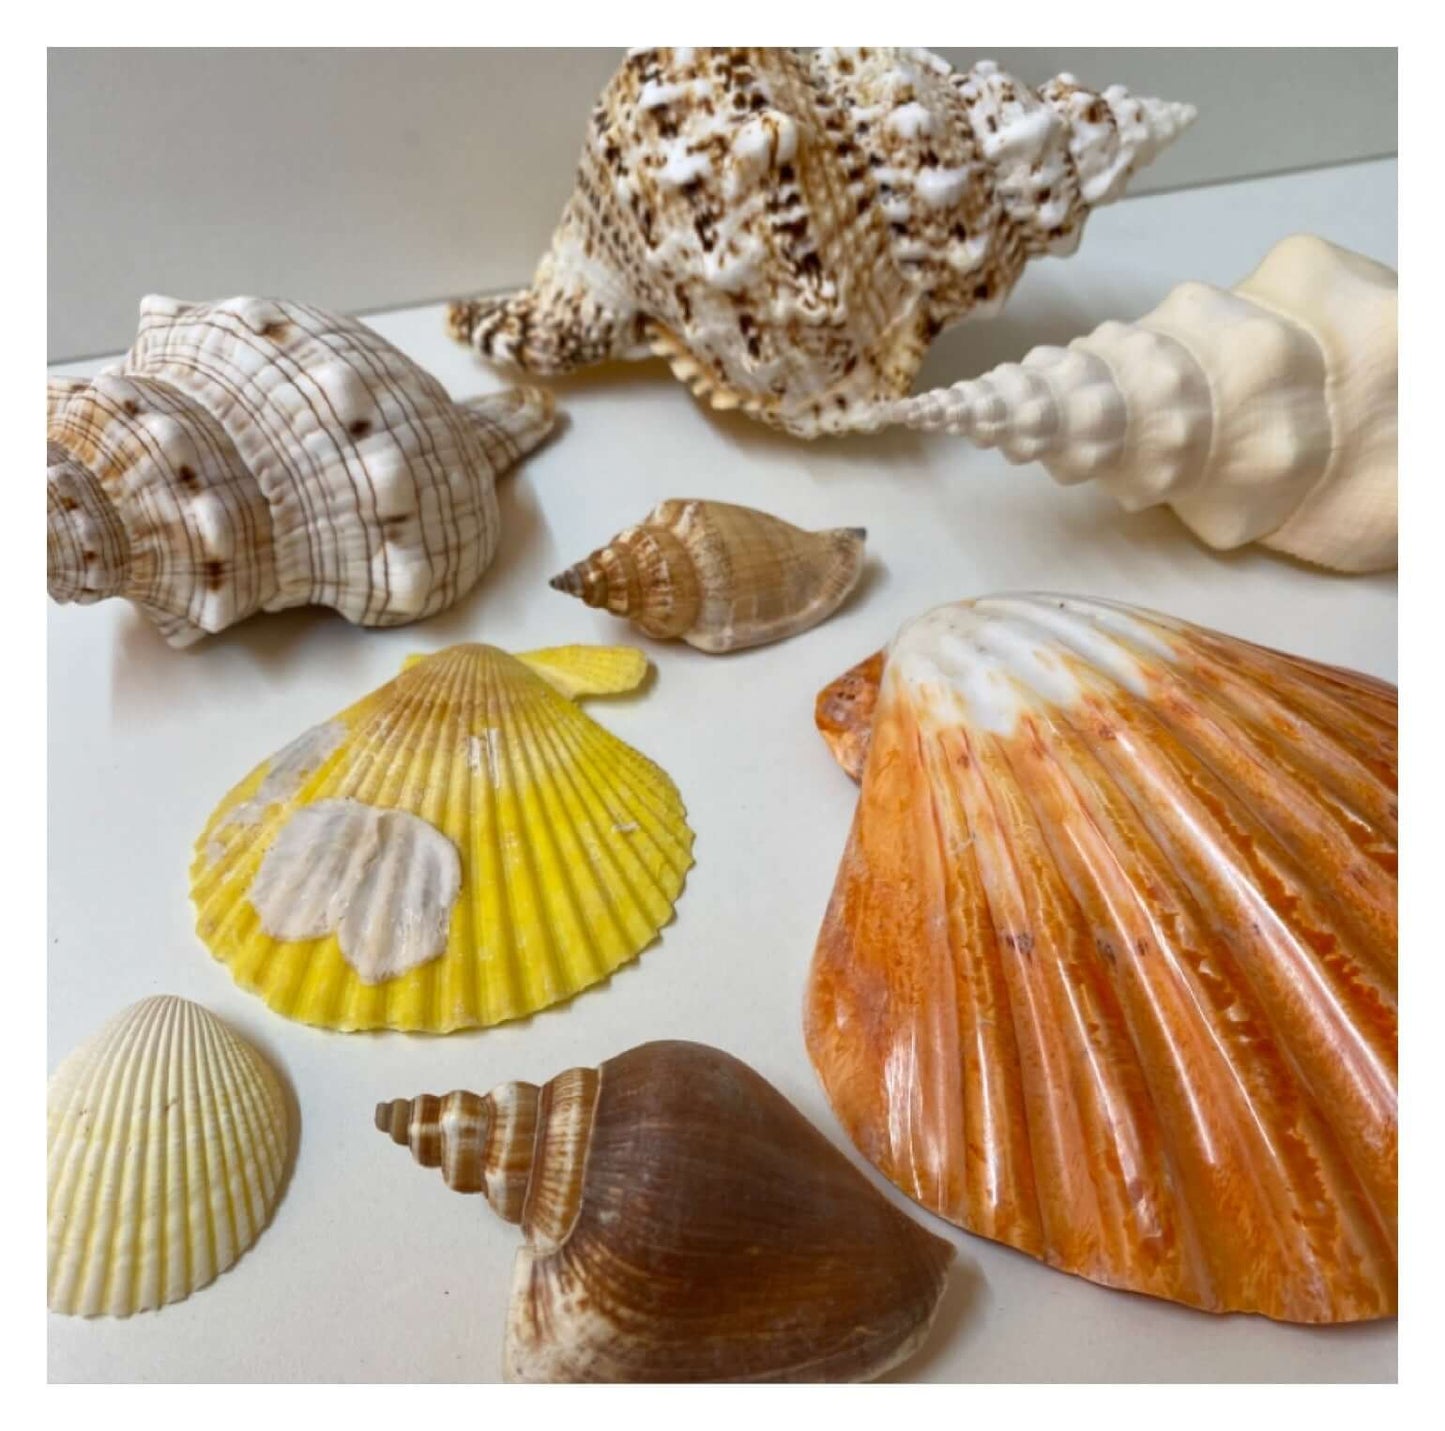 Beach Shell Collection B - The Renmy Store Homewares & Gifts 